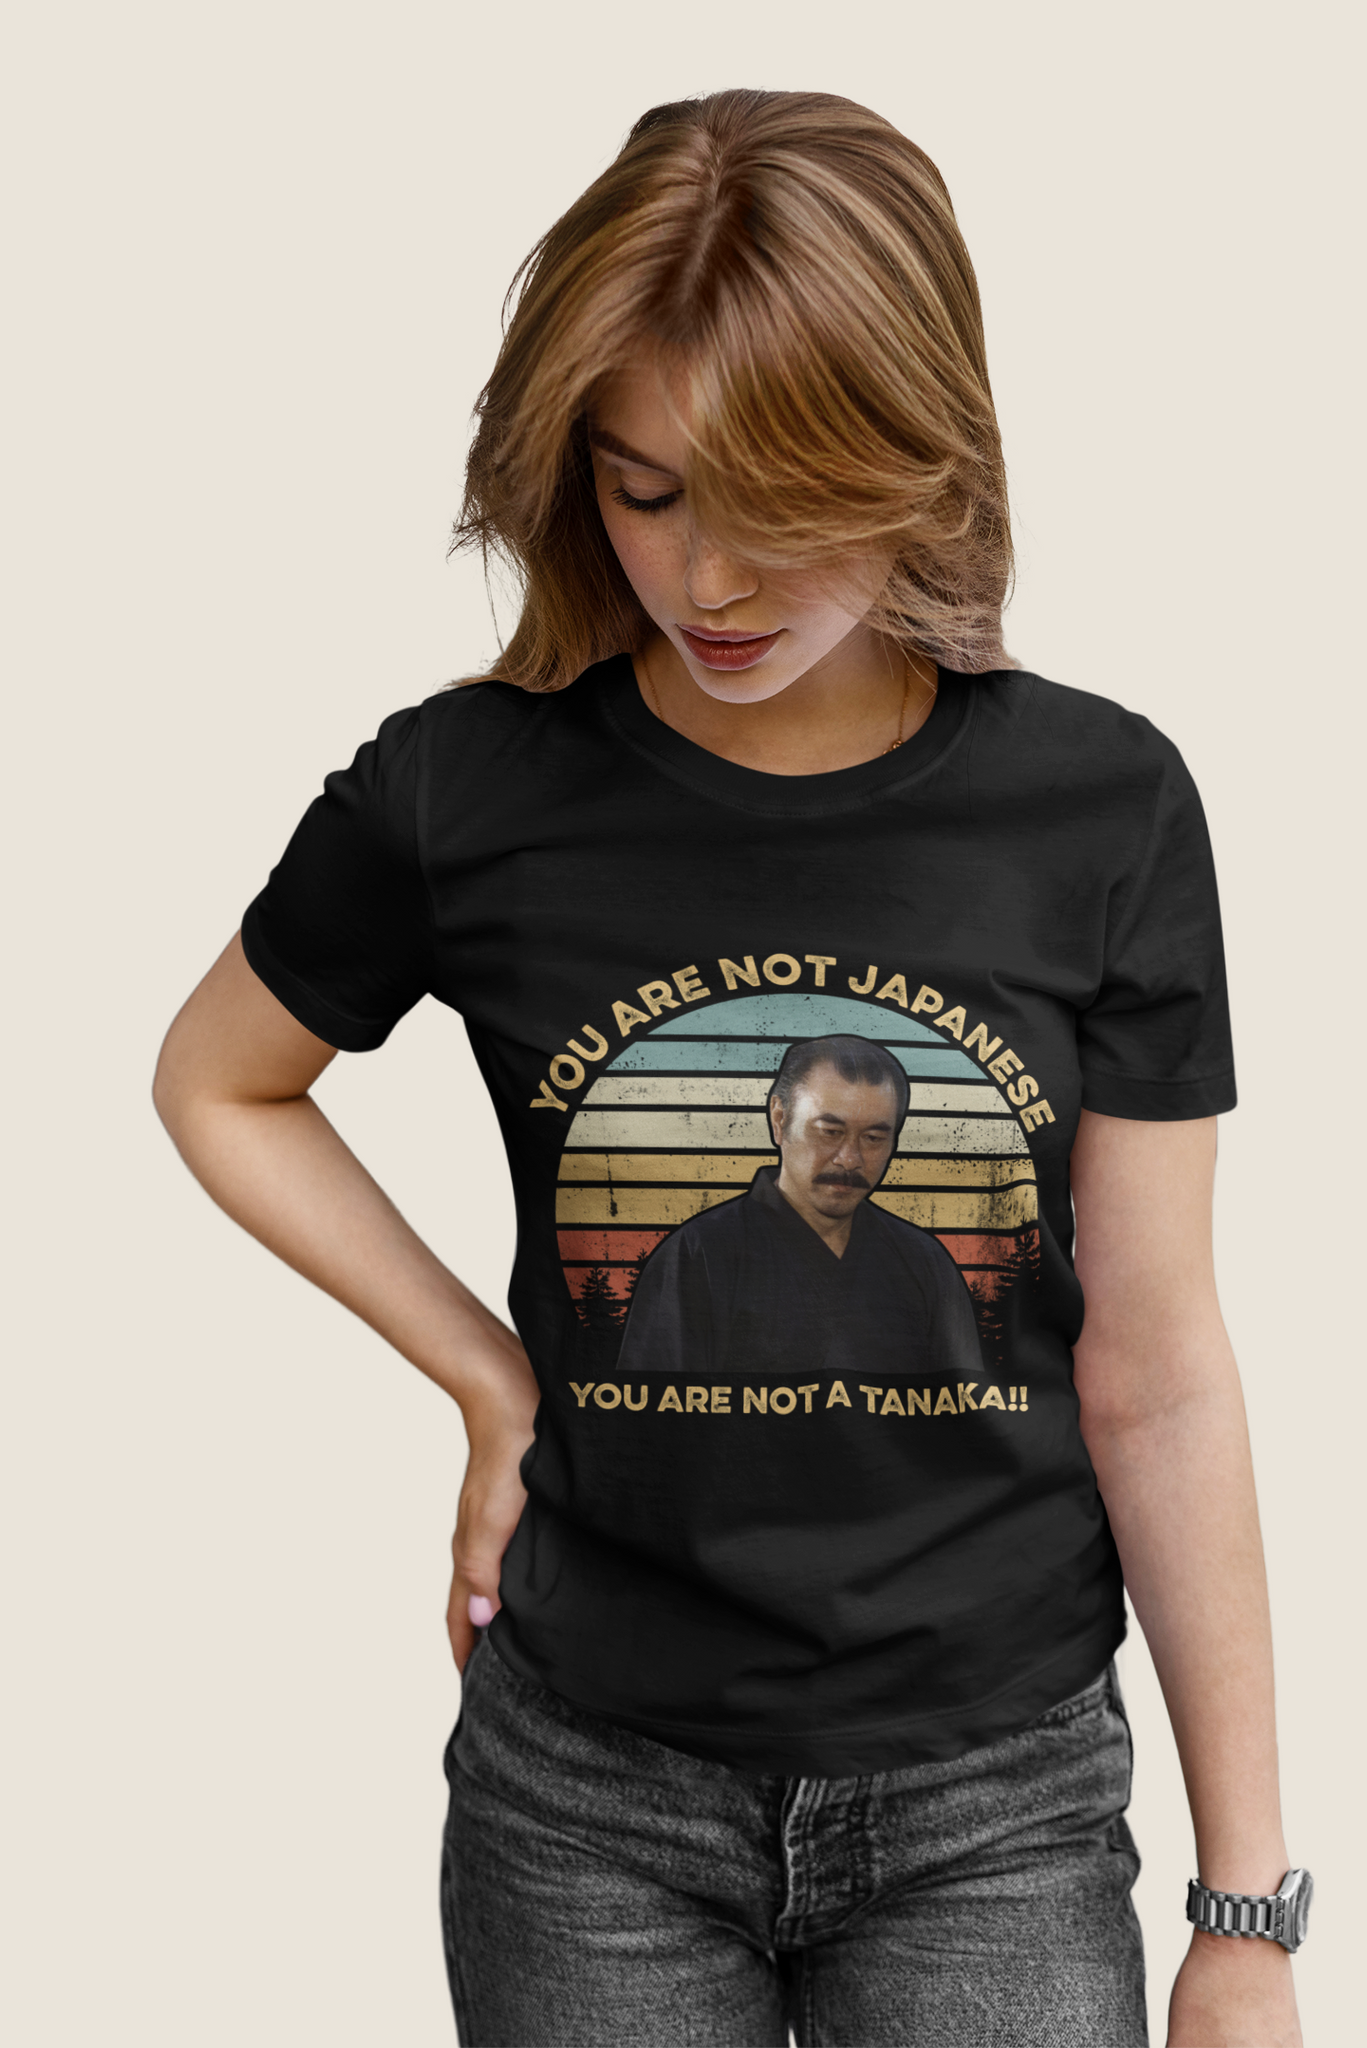 Bloodsport Vintage T Shirt, You Are Not Japanese You Are Not A Tanaka Tshirt, Tanaka T Shirt